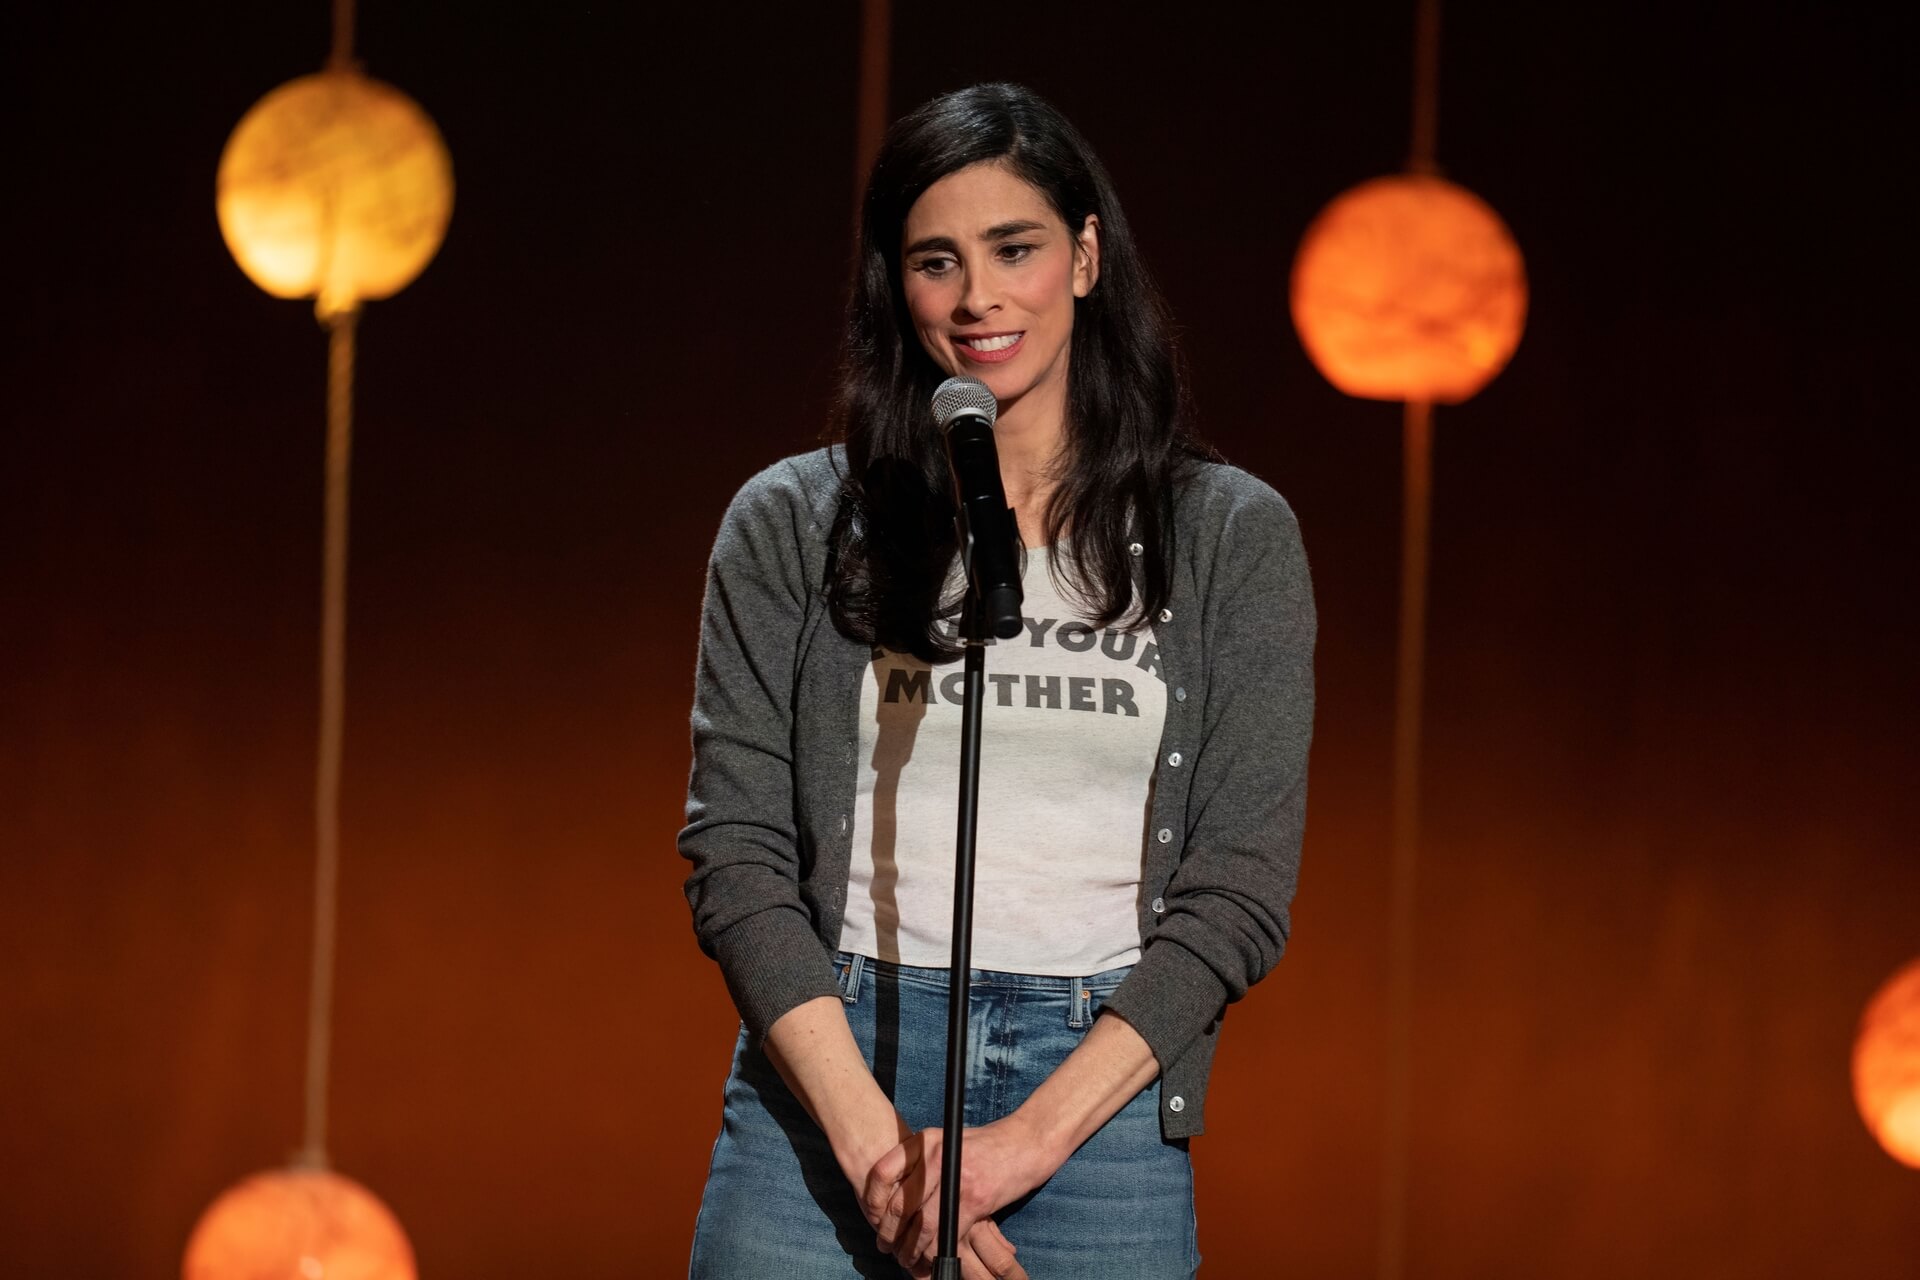 Sarah Silvermans is back with the toilet humor, but over the lectures.